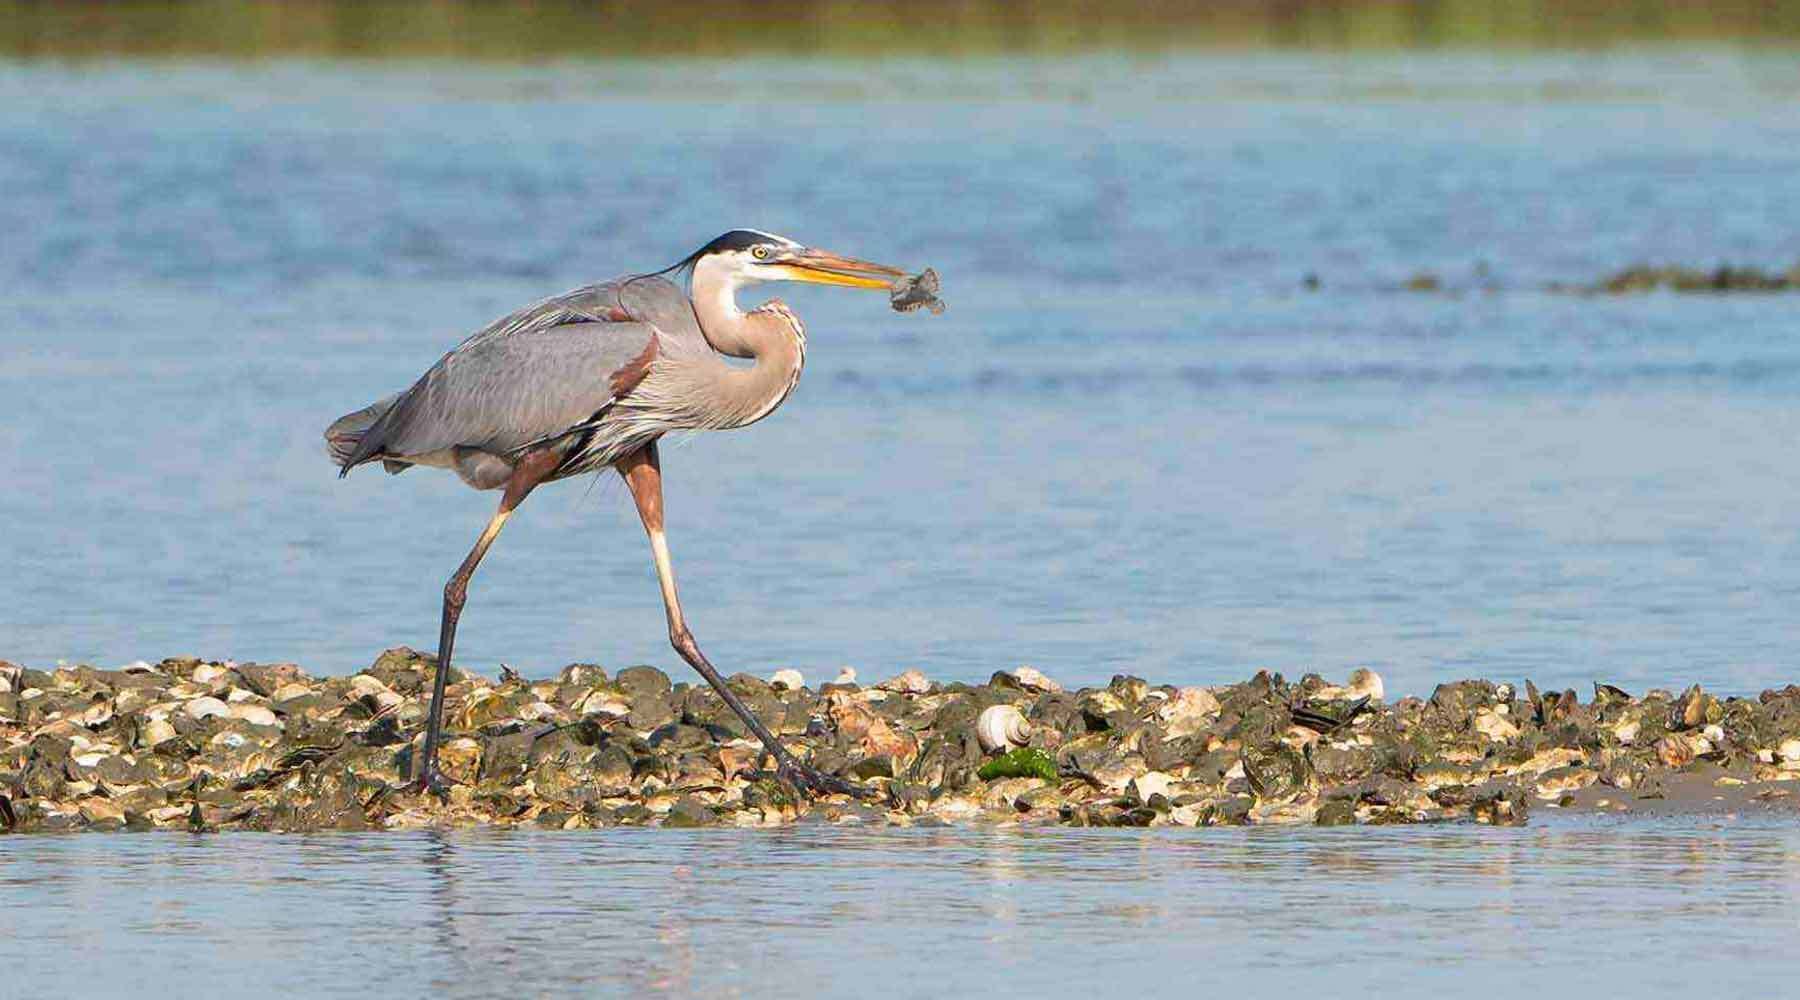 Heron with Fish in Mouth